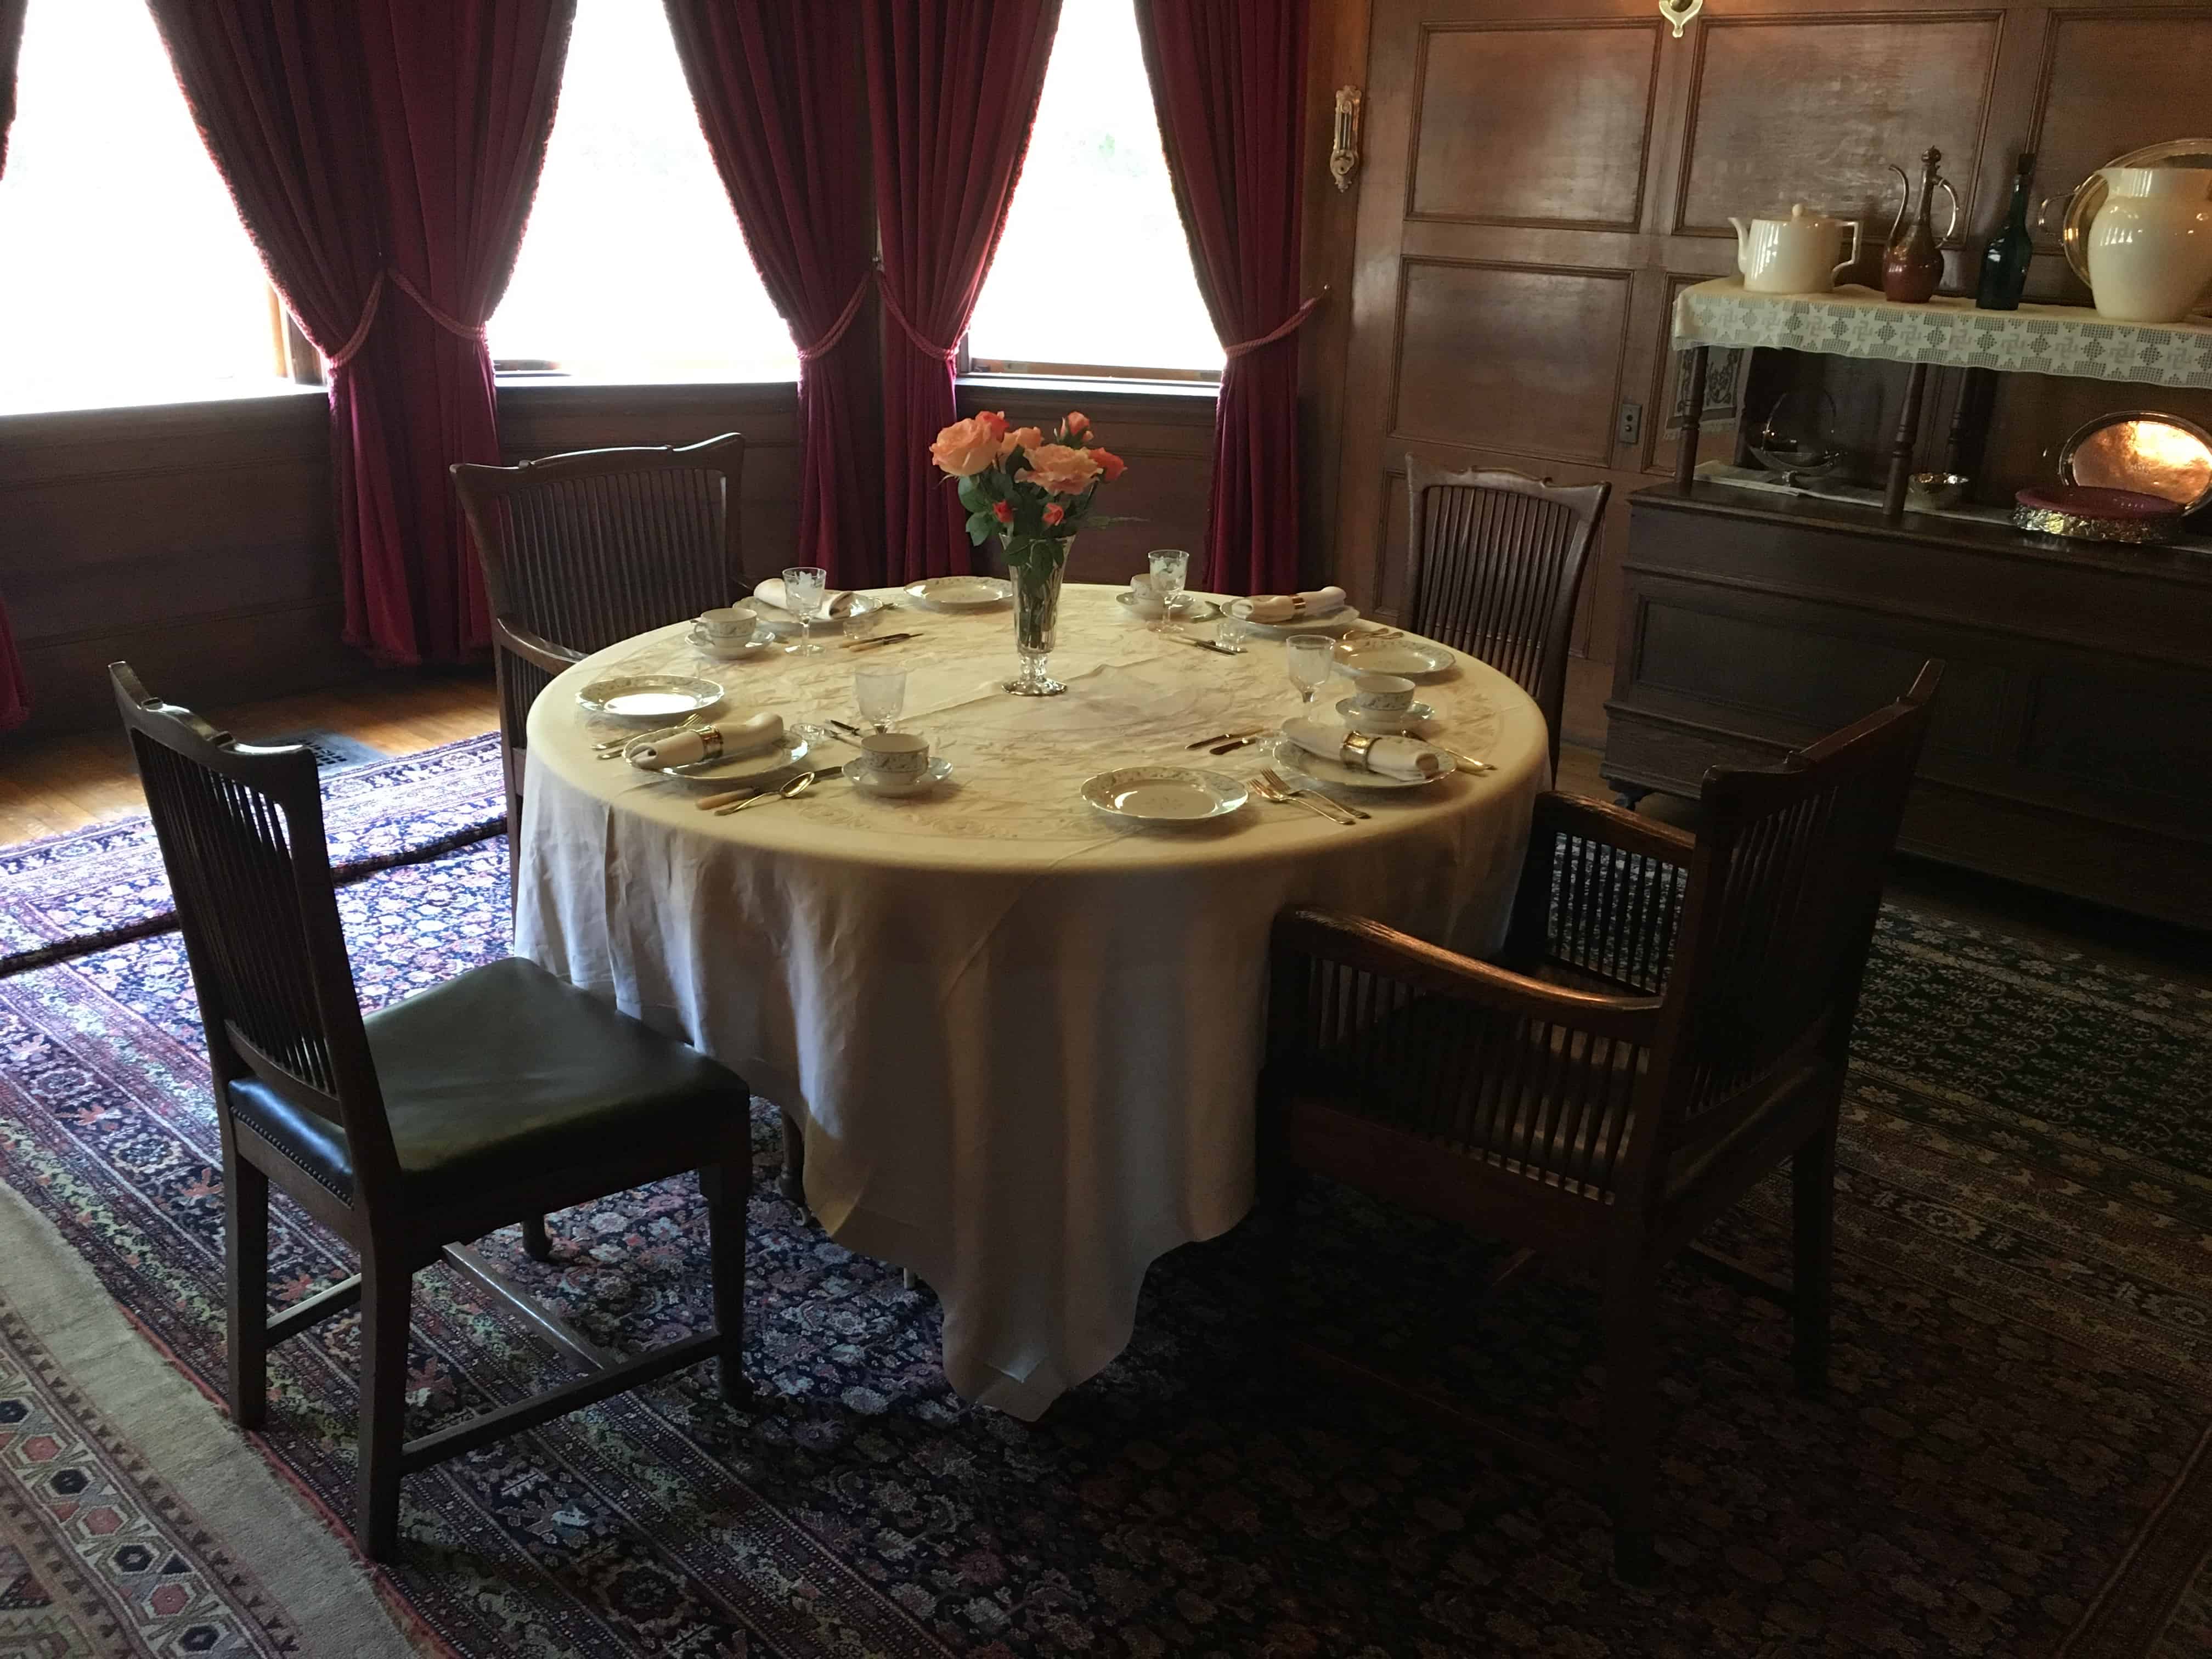 Dining room at the John J. Glessner House in Chicago, Illinois